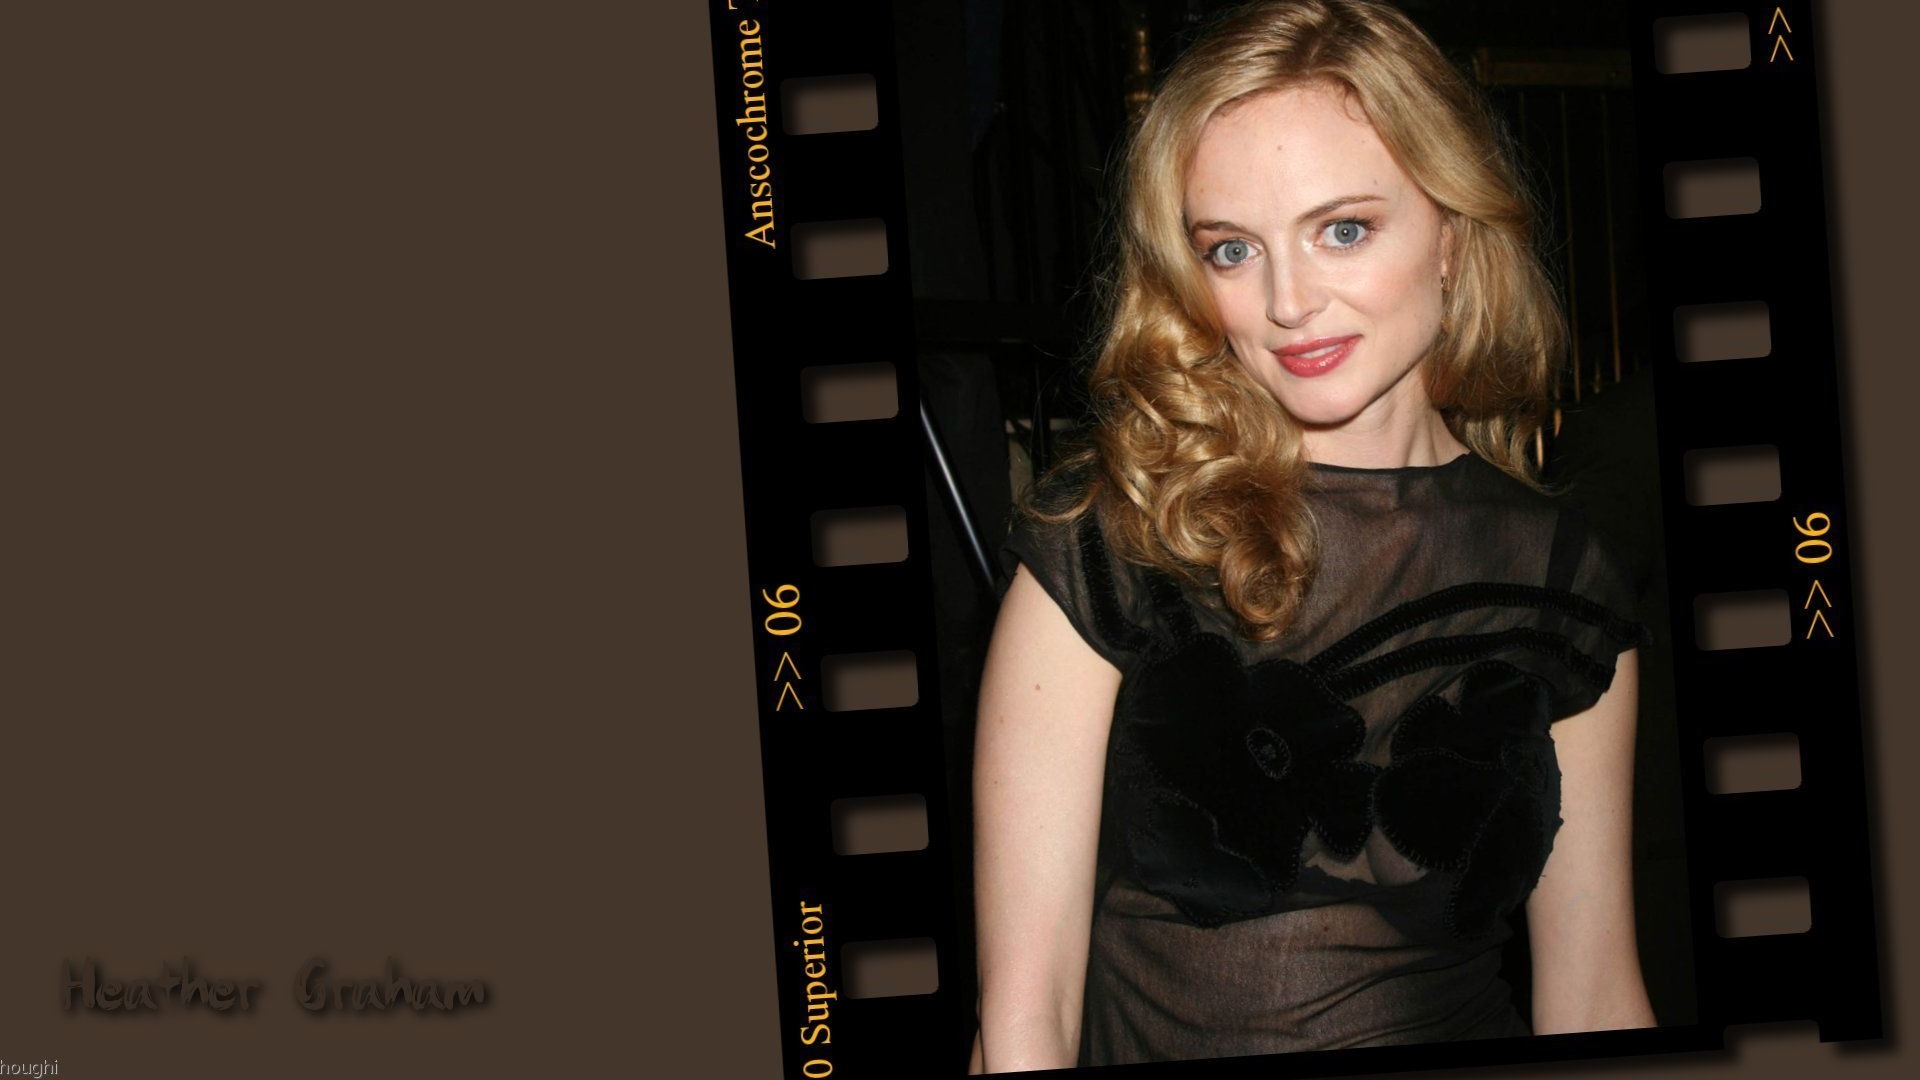 Heather Graham #006 - 1920x1080 Wallpapers Pictures Photos Images